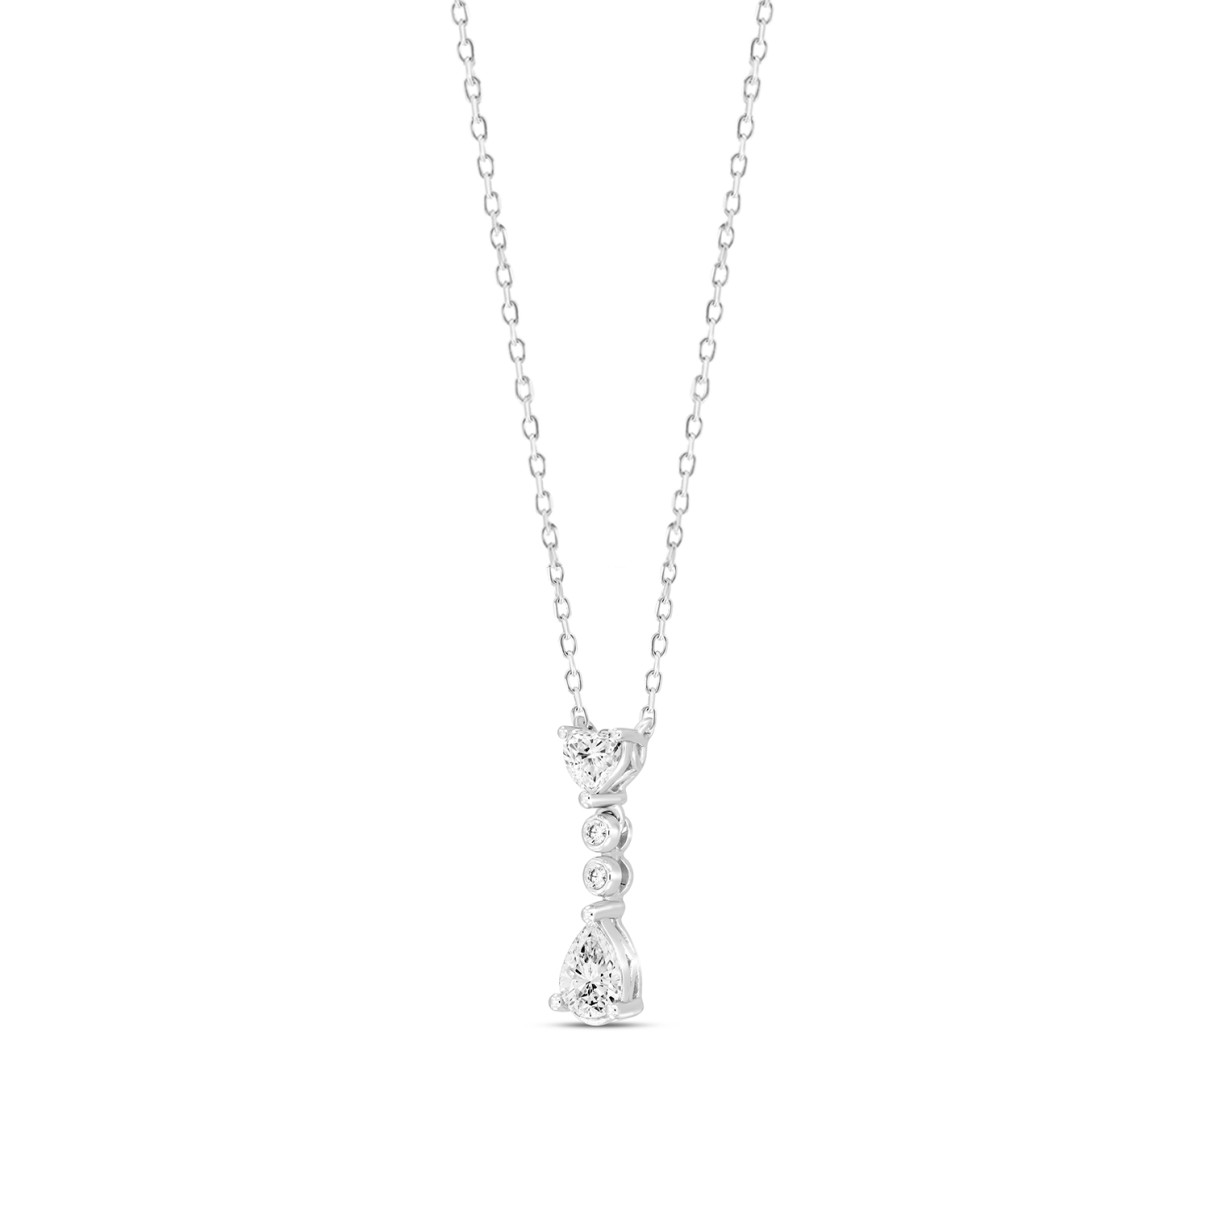 LADIES NECKLACE 3/4CT ROUND/PEAR/HEART DIAMOND 14K WHITE GOLD WITH CHAIN